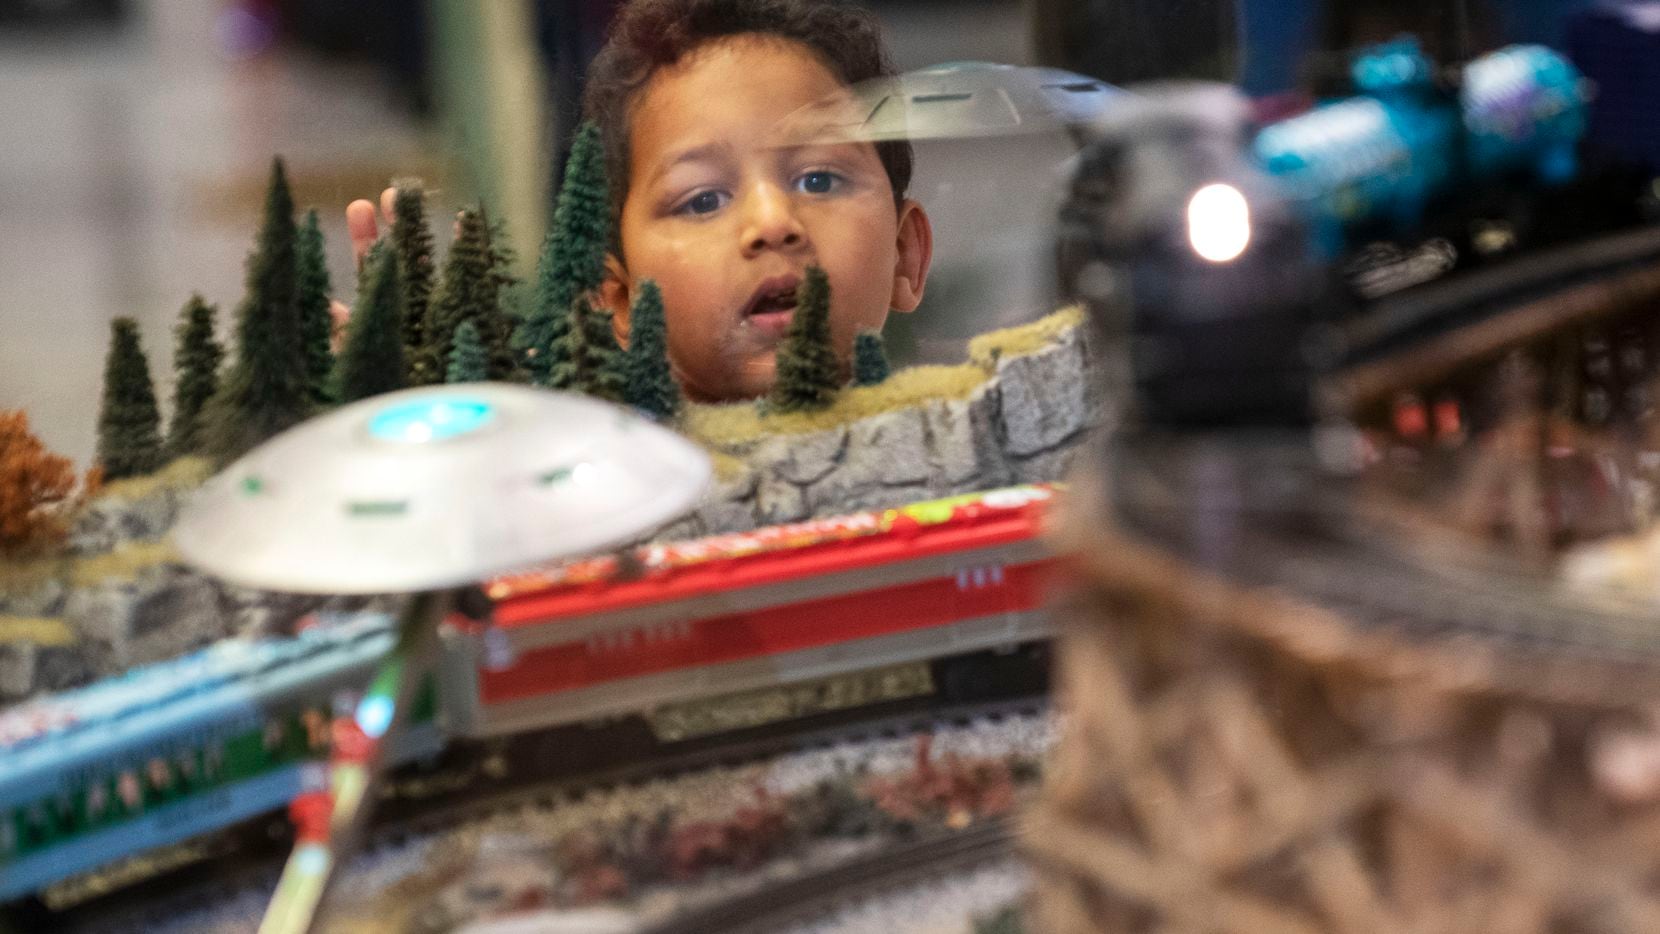 Dylan Patel, 3, watches in awe as the trains roll by while visiting the Trains at NorthPark...